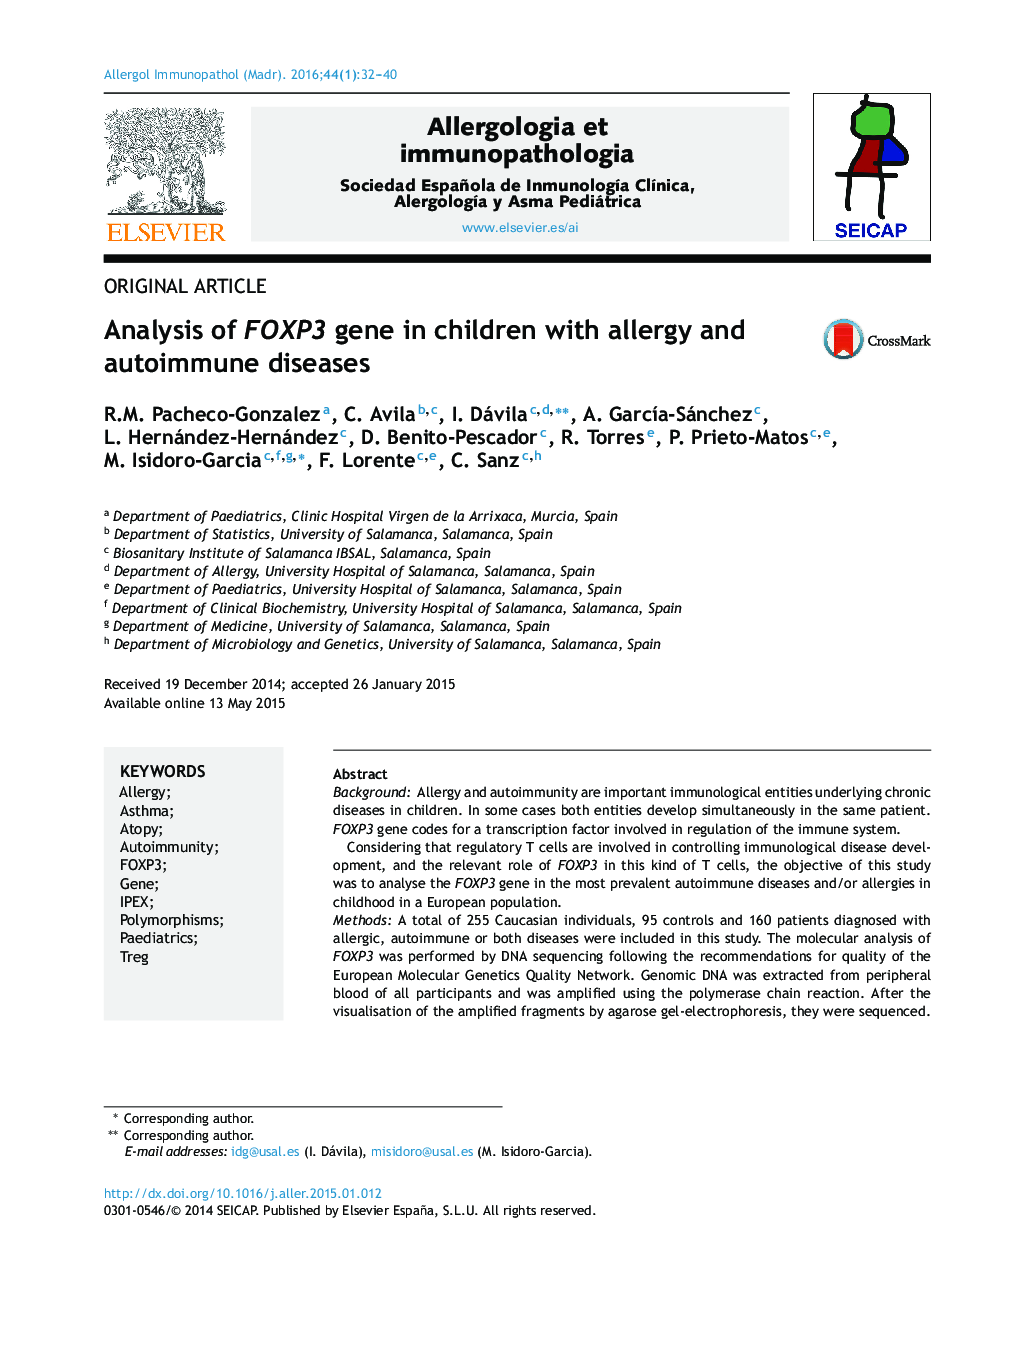 Analysis of FOXP3 gene in children with allergy and autoimmune diseases